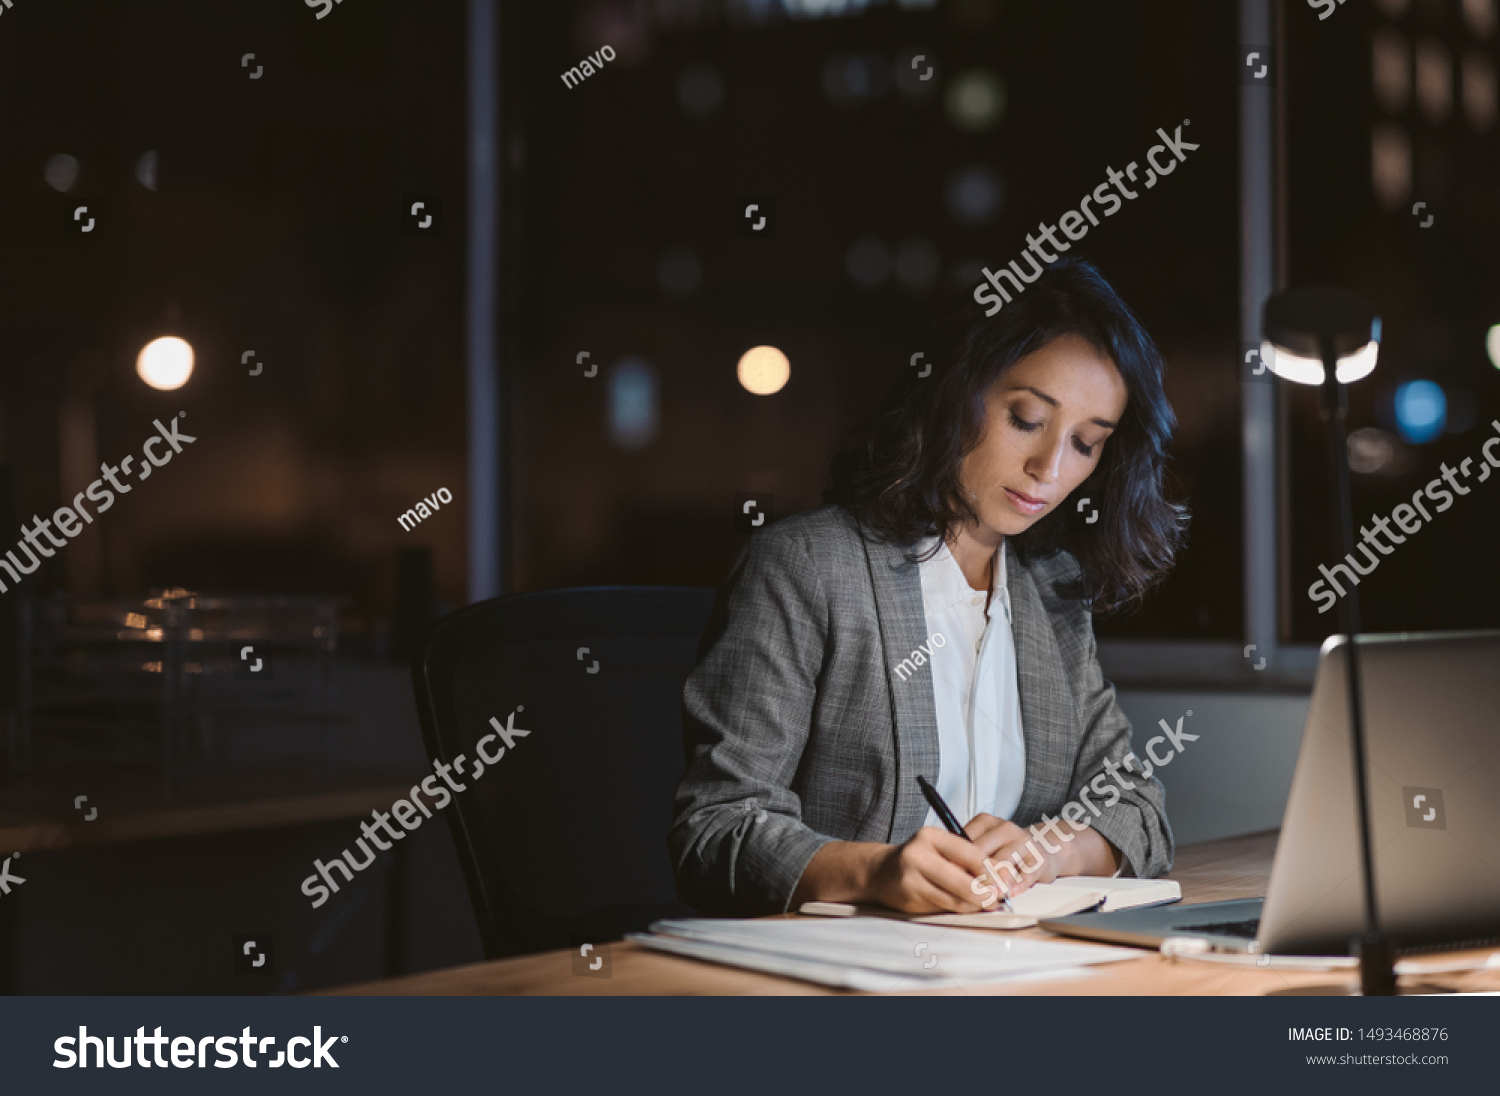 Young businesswoman using a laptop and writing notes while working overtime at her office desk late in the evening #1493468876